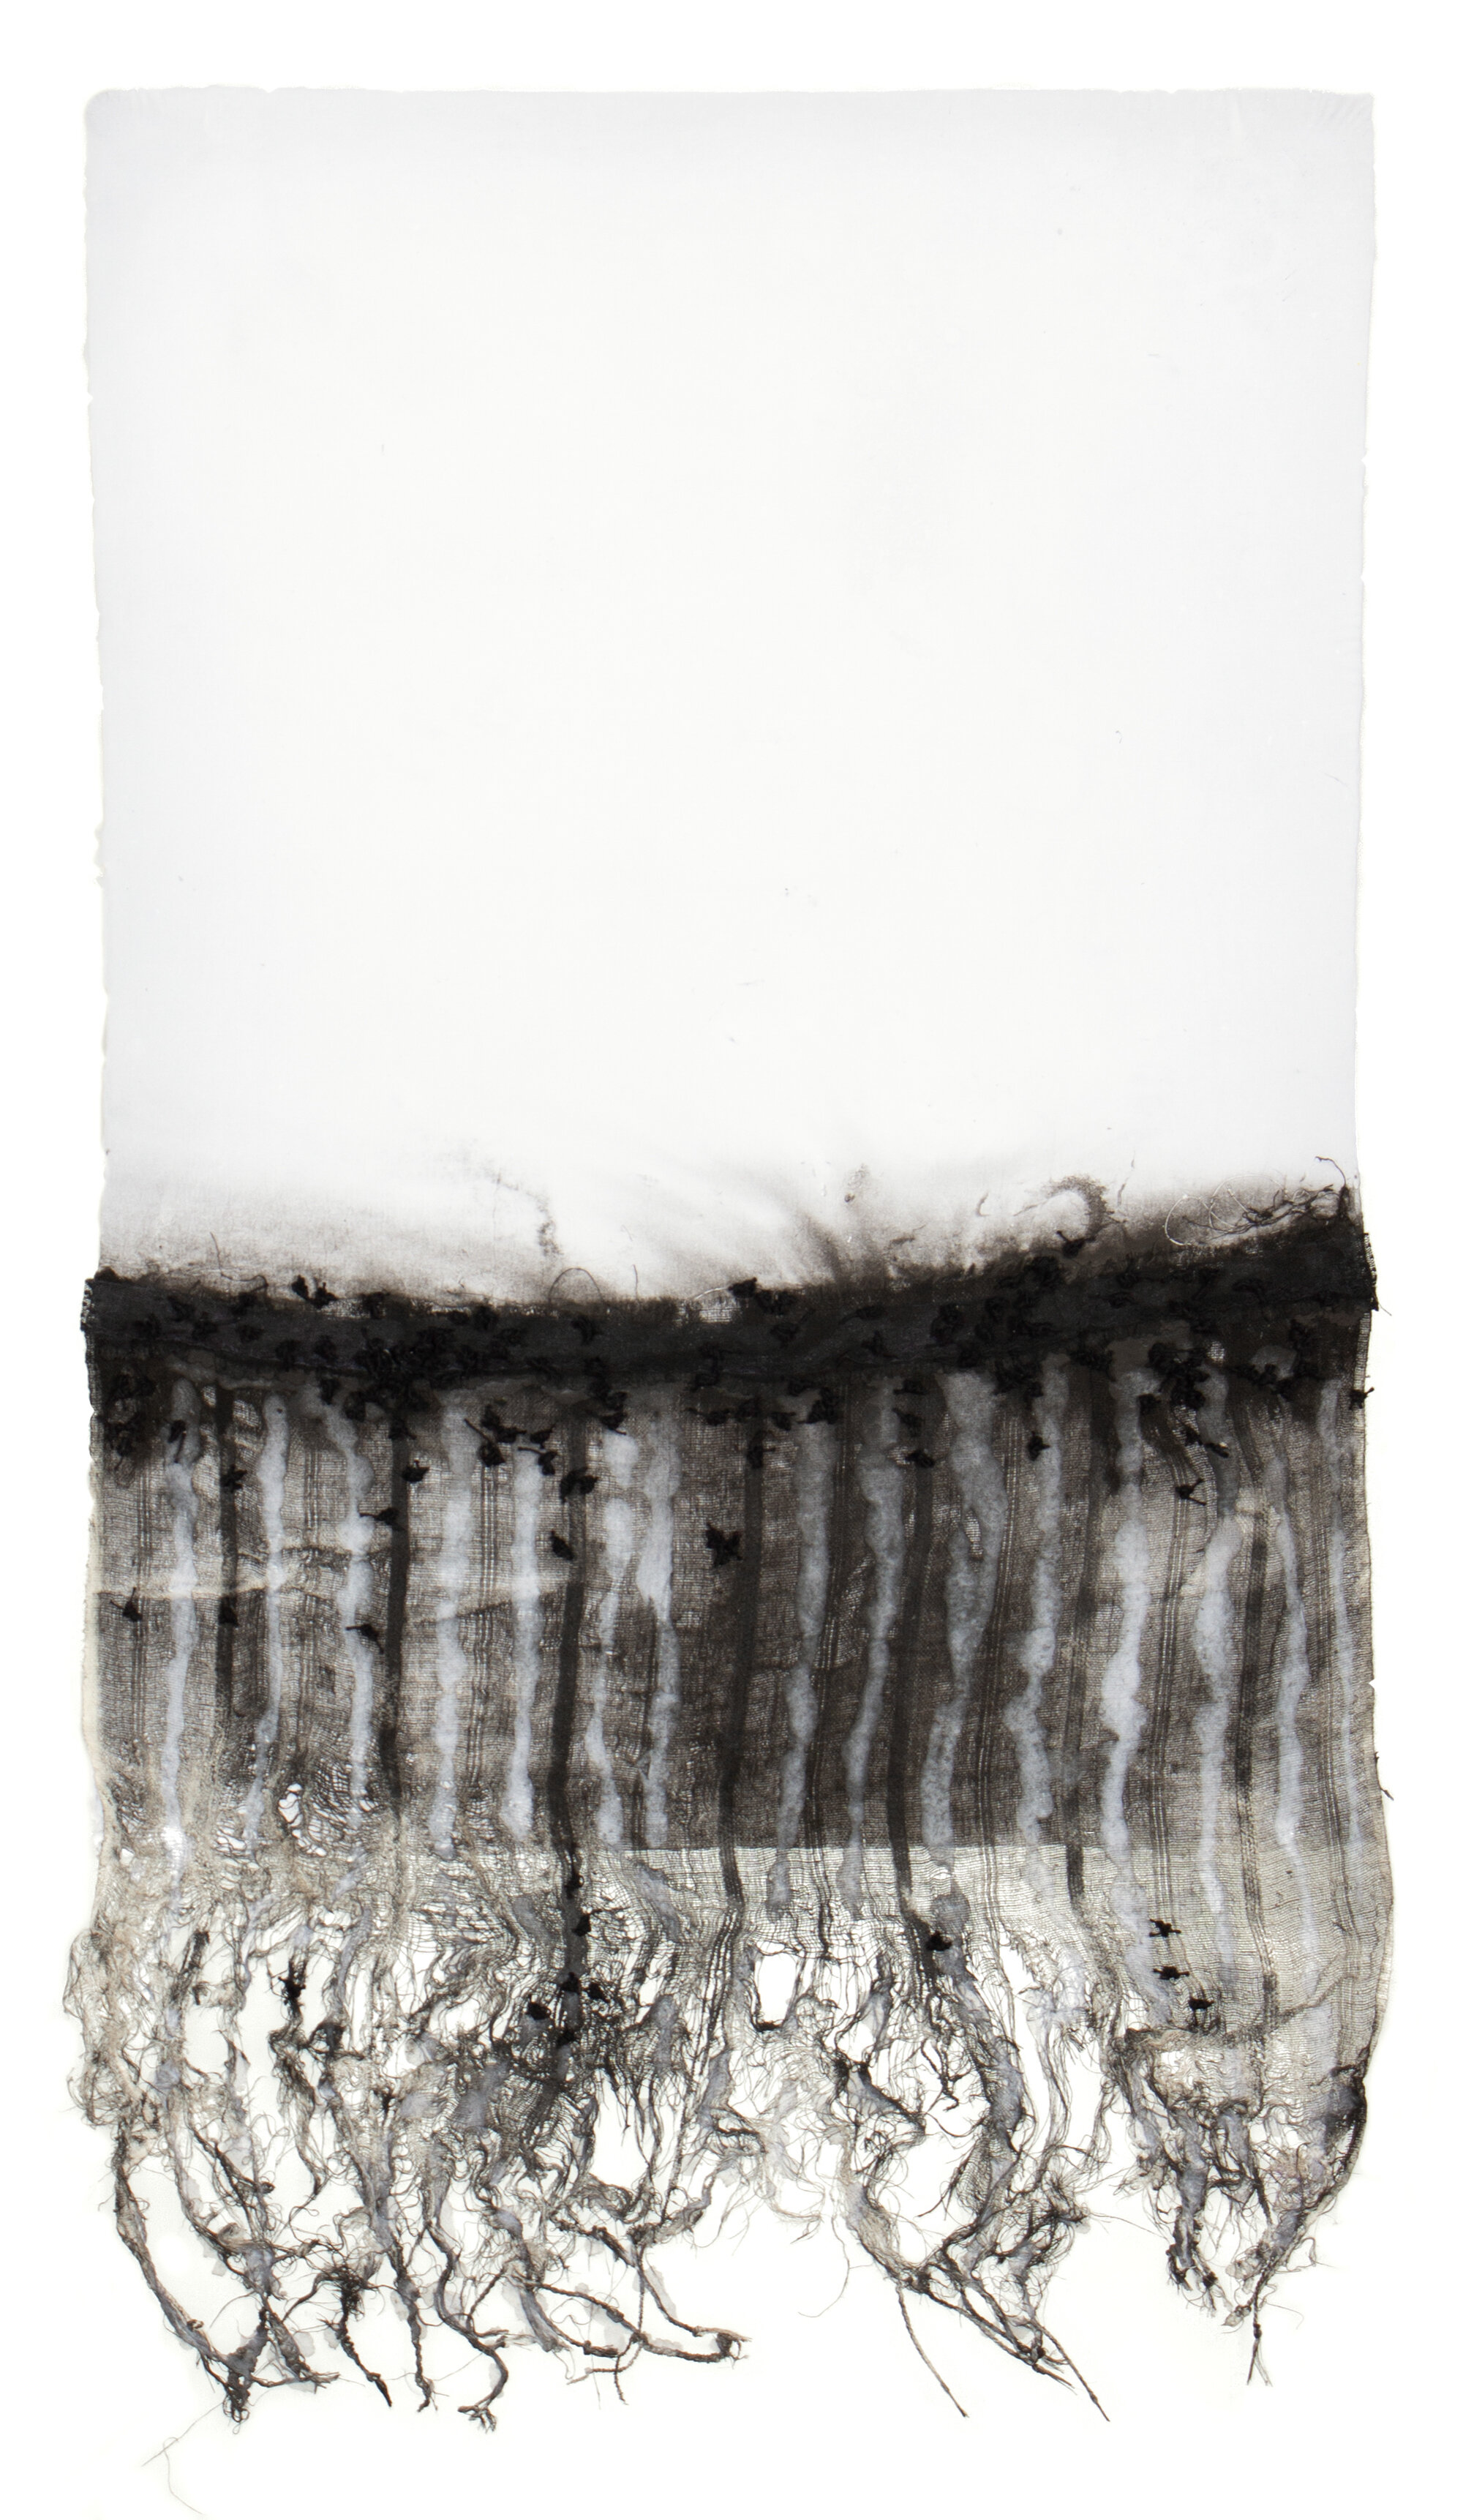   Untitled , 2019 Handmade linen paper, linen, lace, thread, and pigment 40.5 x 22.5 in. 